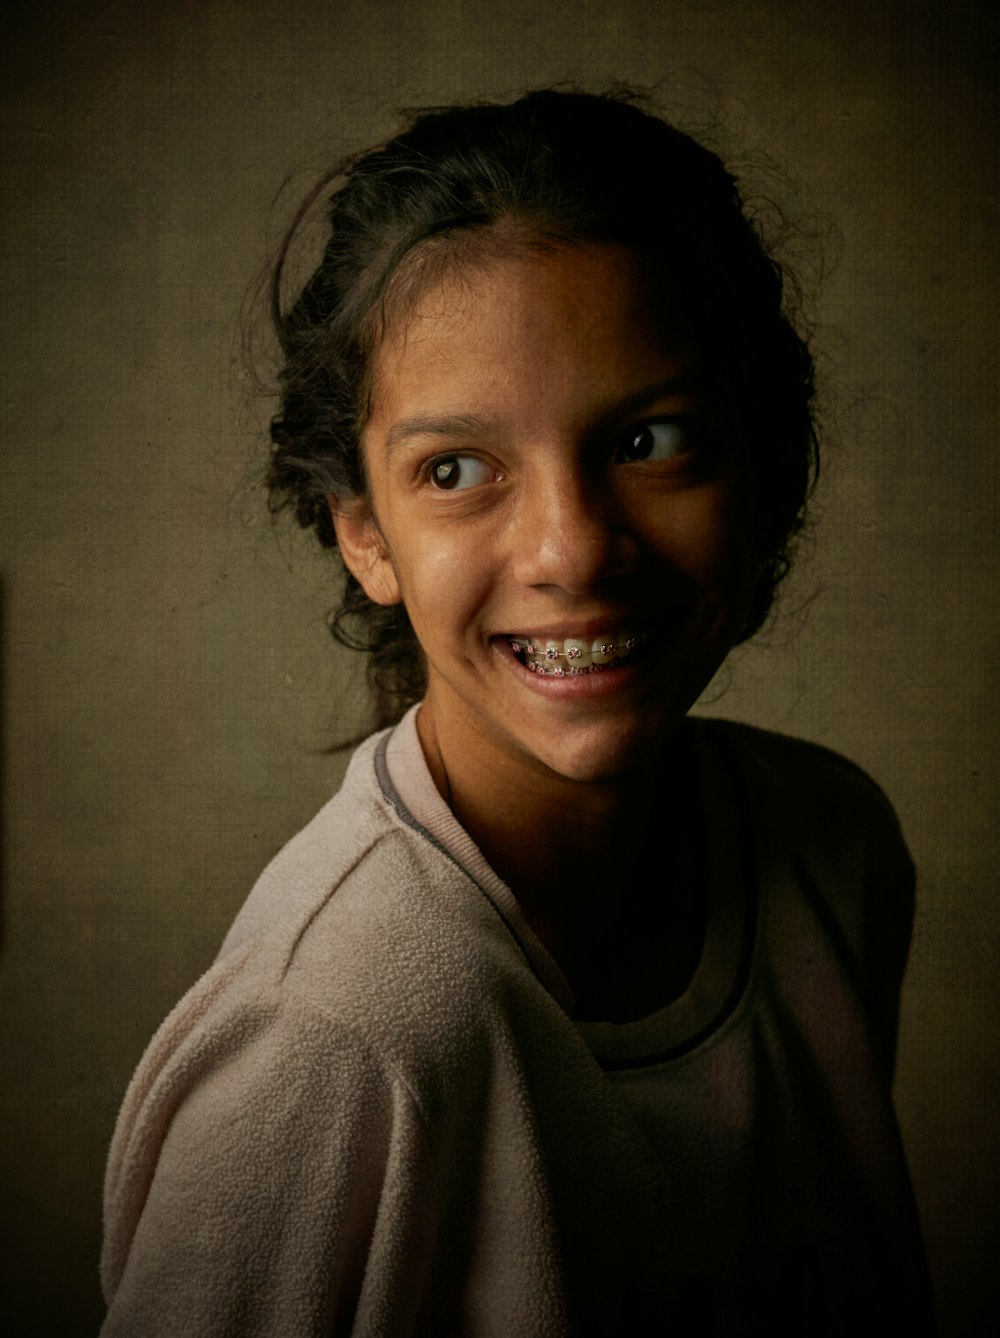 a smiling young girl with braces on her teeth